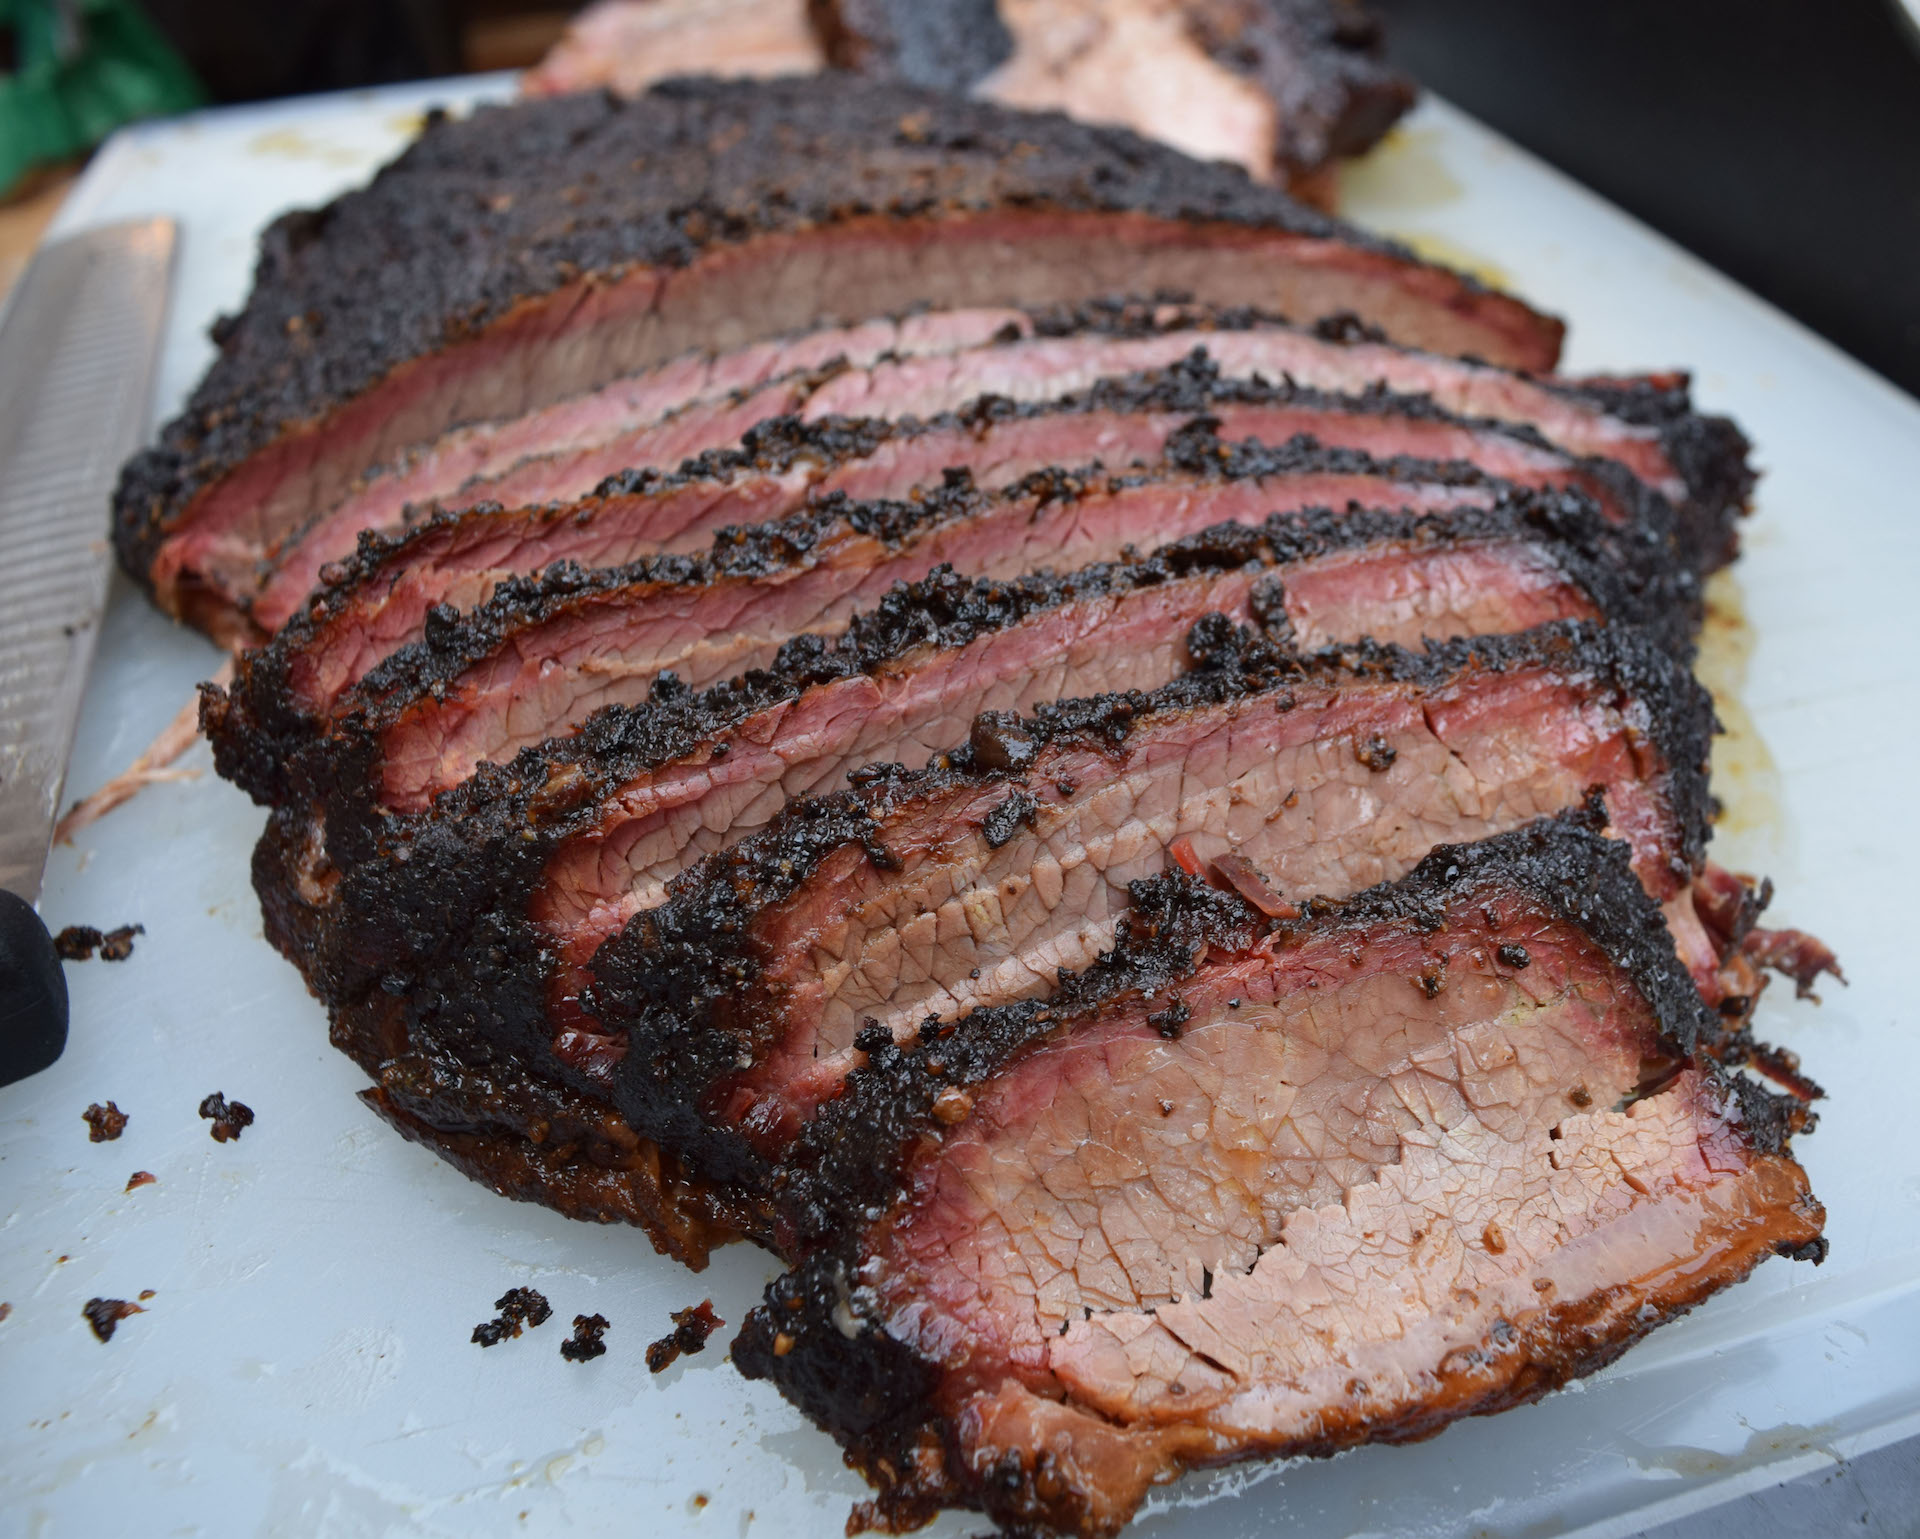 Brisket Cook Temp - How to Cook Brisket in the Oven